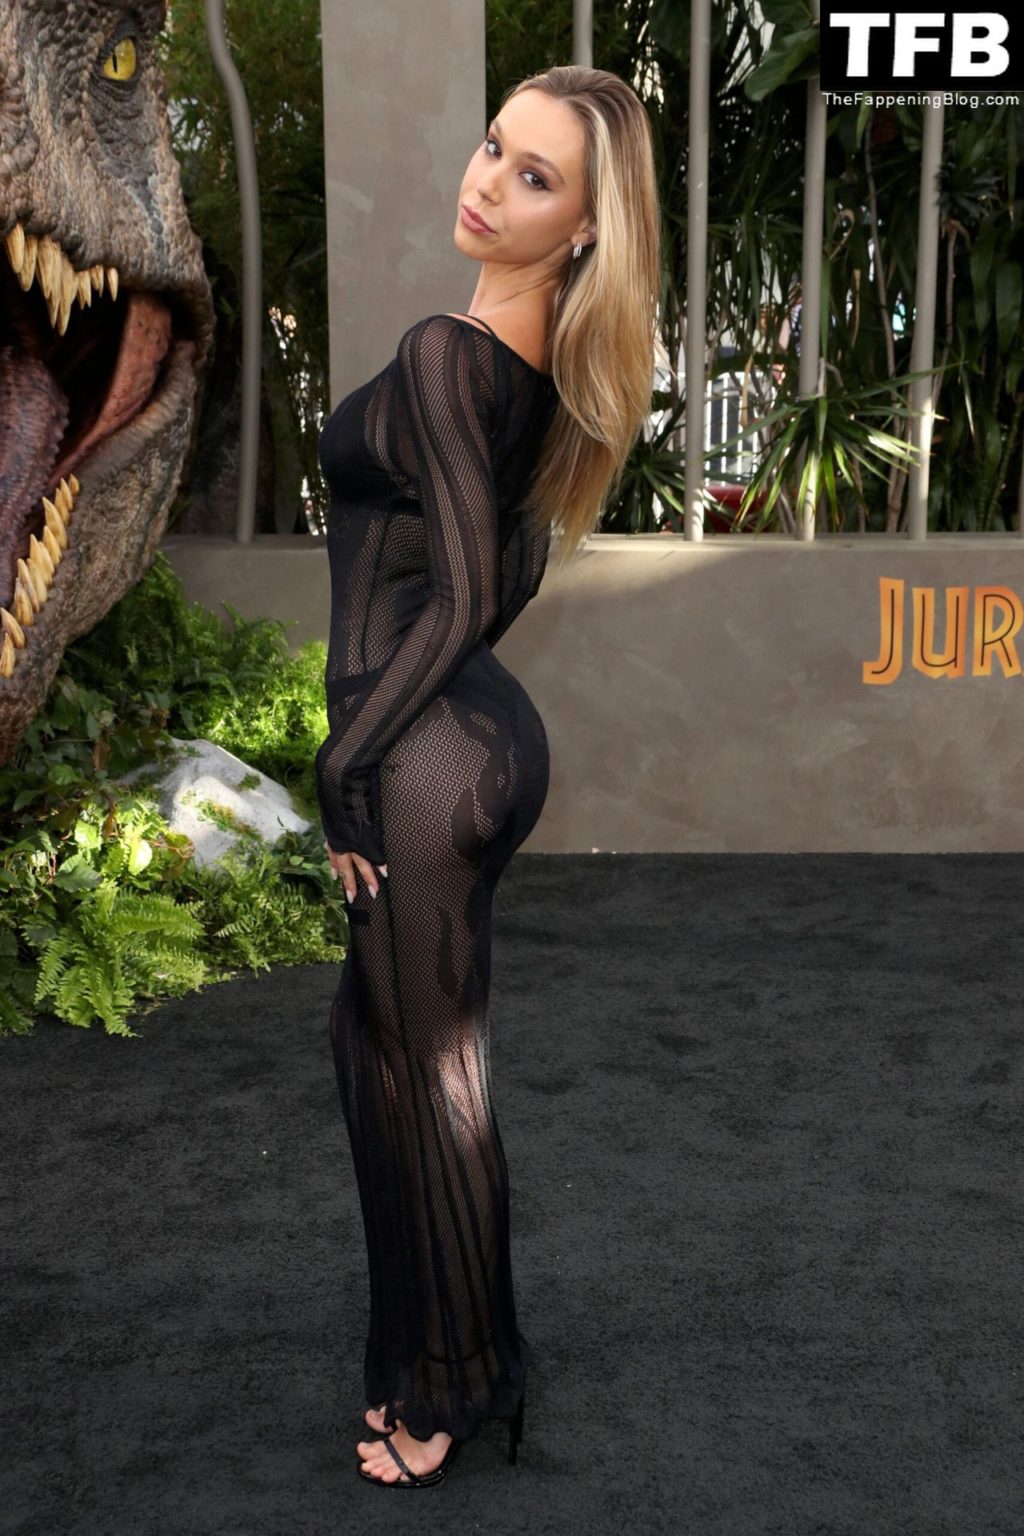 Alexis Ren Sexy The Fappening Blog 9 1024x1536 - Alexis Ren Displays Her Slender Figure in a See-Through Dress at the “Jurassic World: Dominion” Premiere (41 Photos)